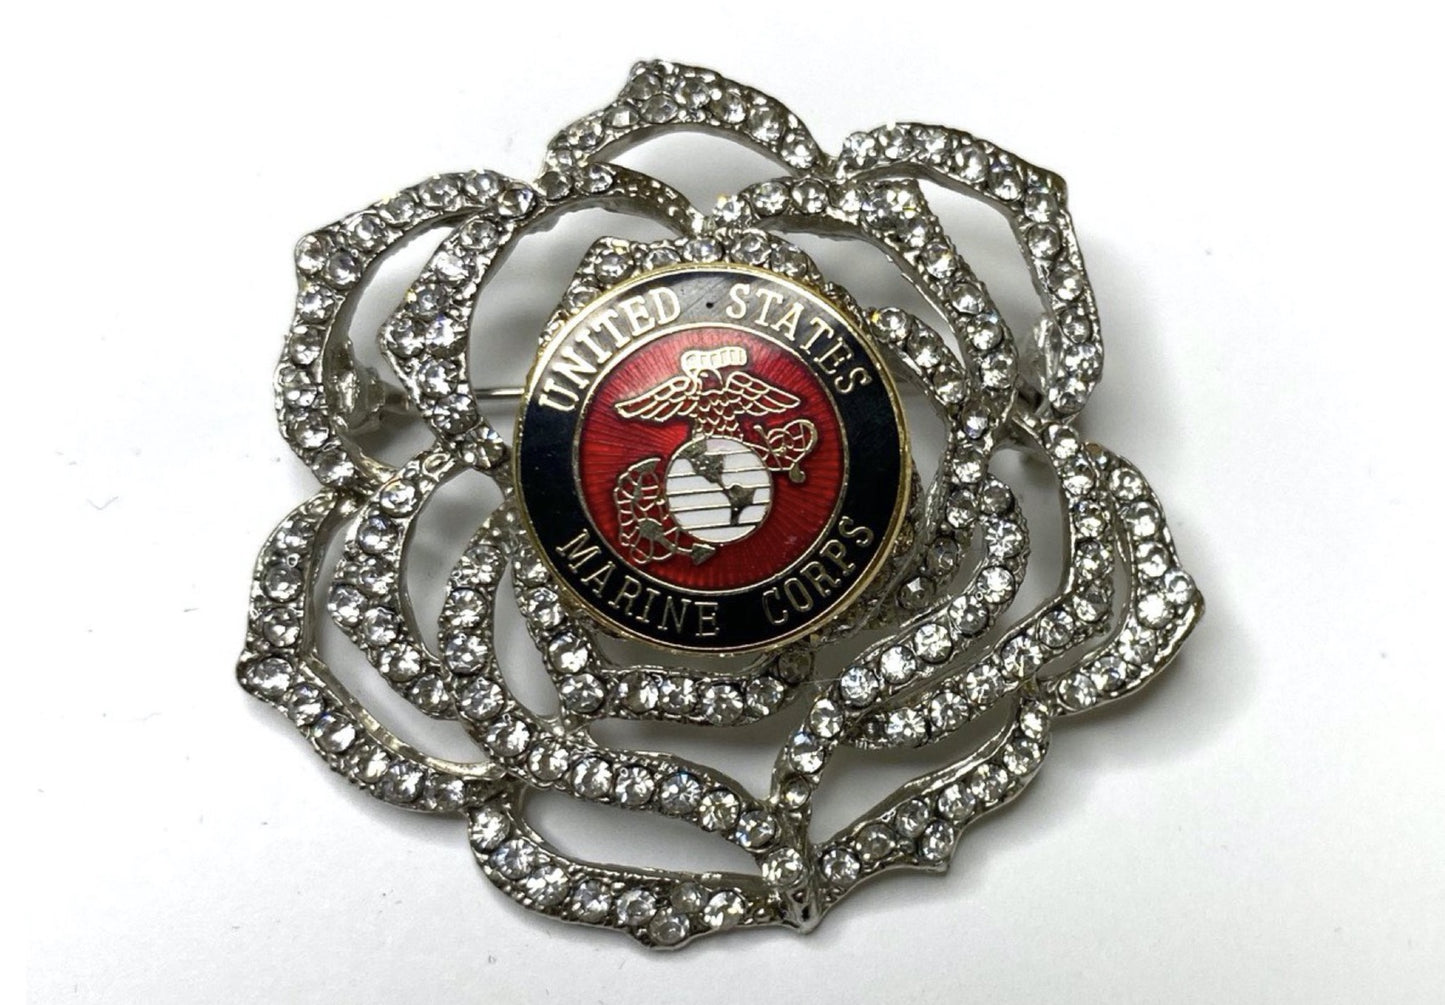 US Marine Corps Limited Edition Brooch BR306